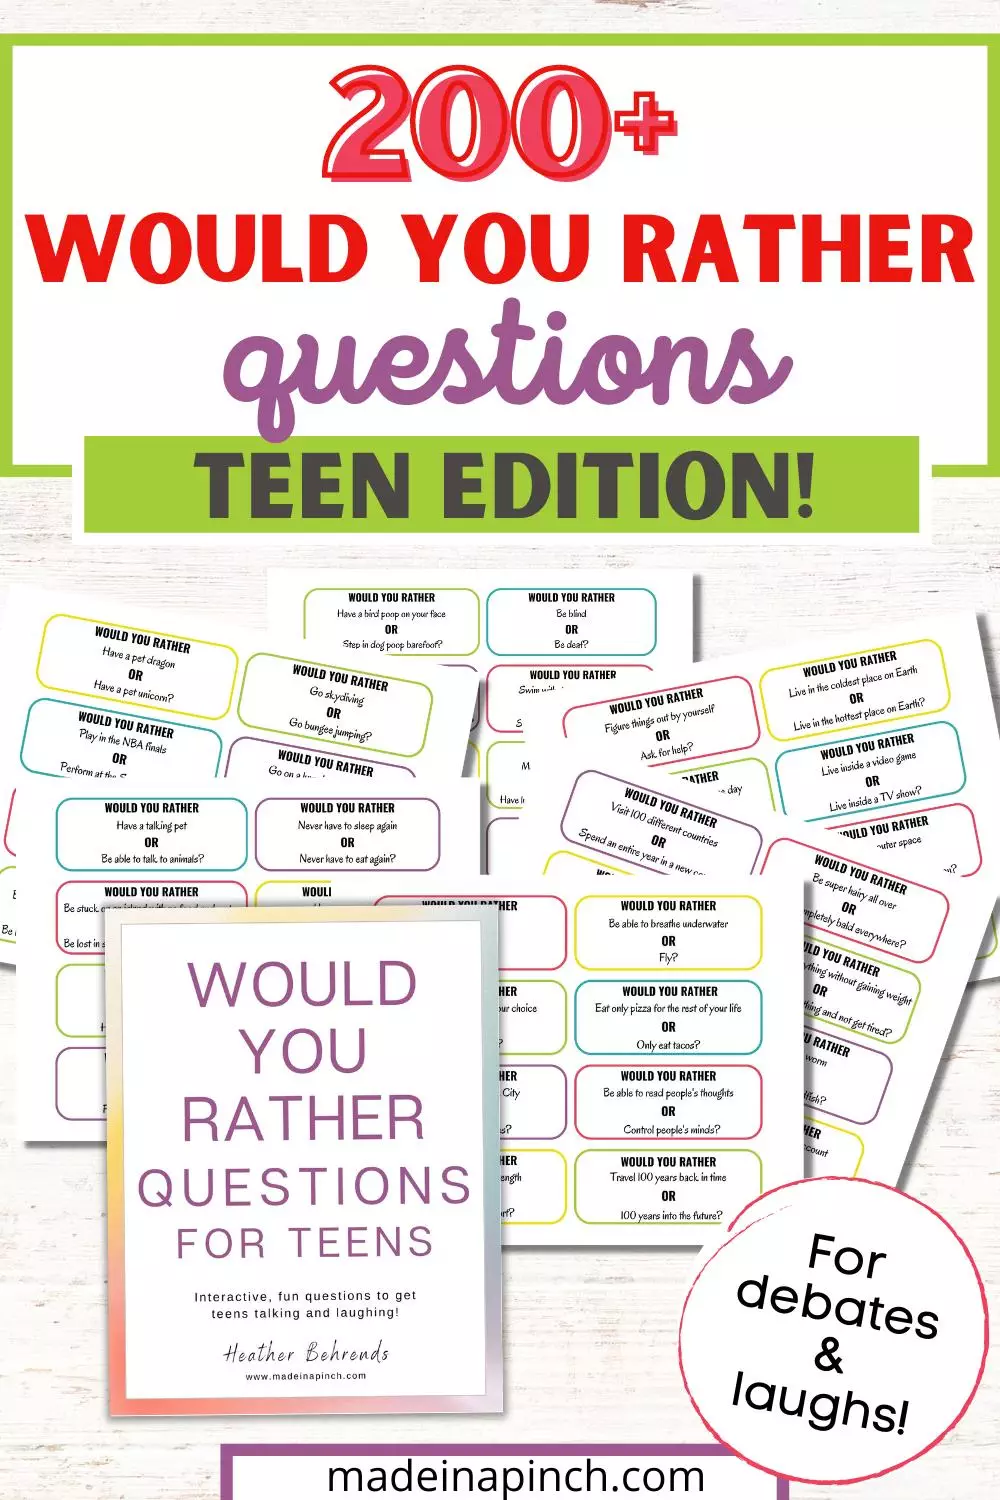 teenager would you rather questions pin image